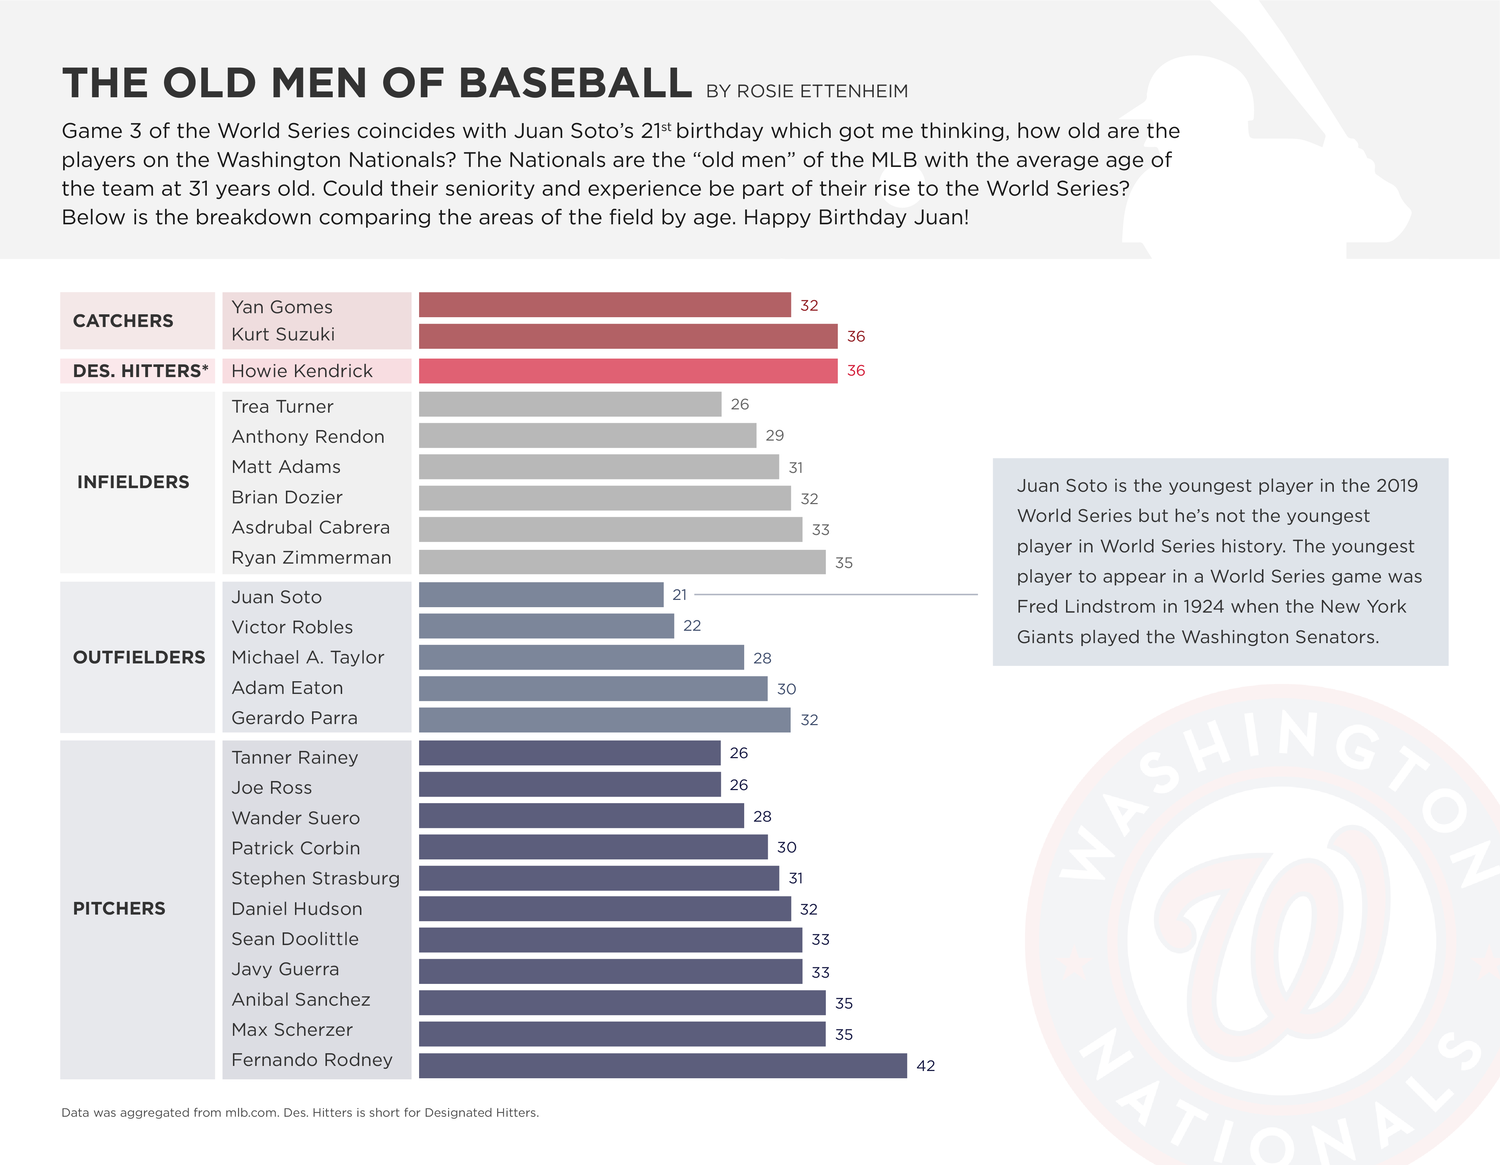 bar chart showing the ages of various baseball players